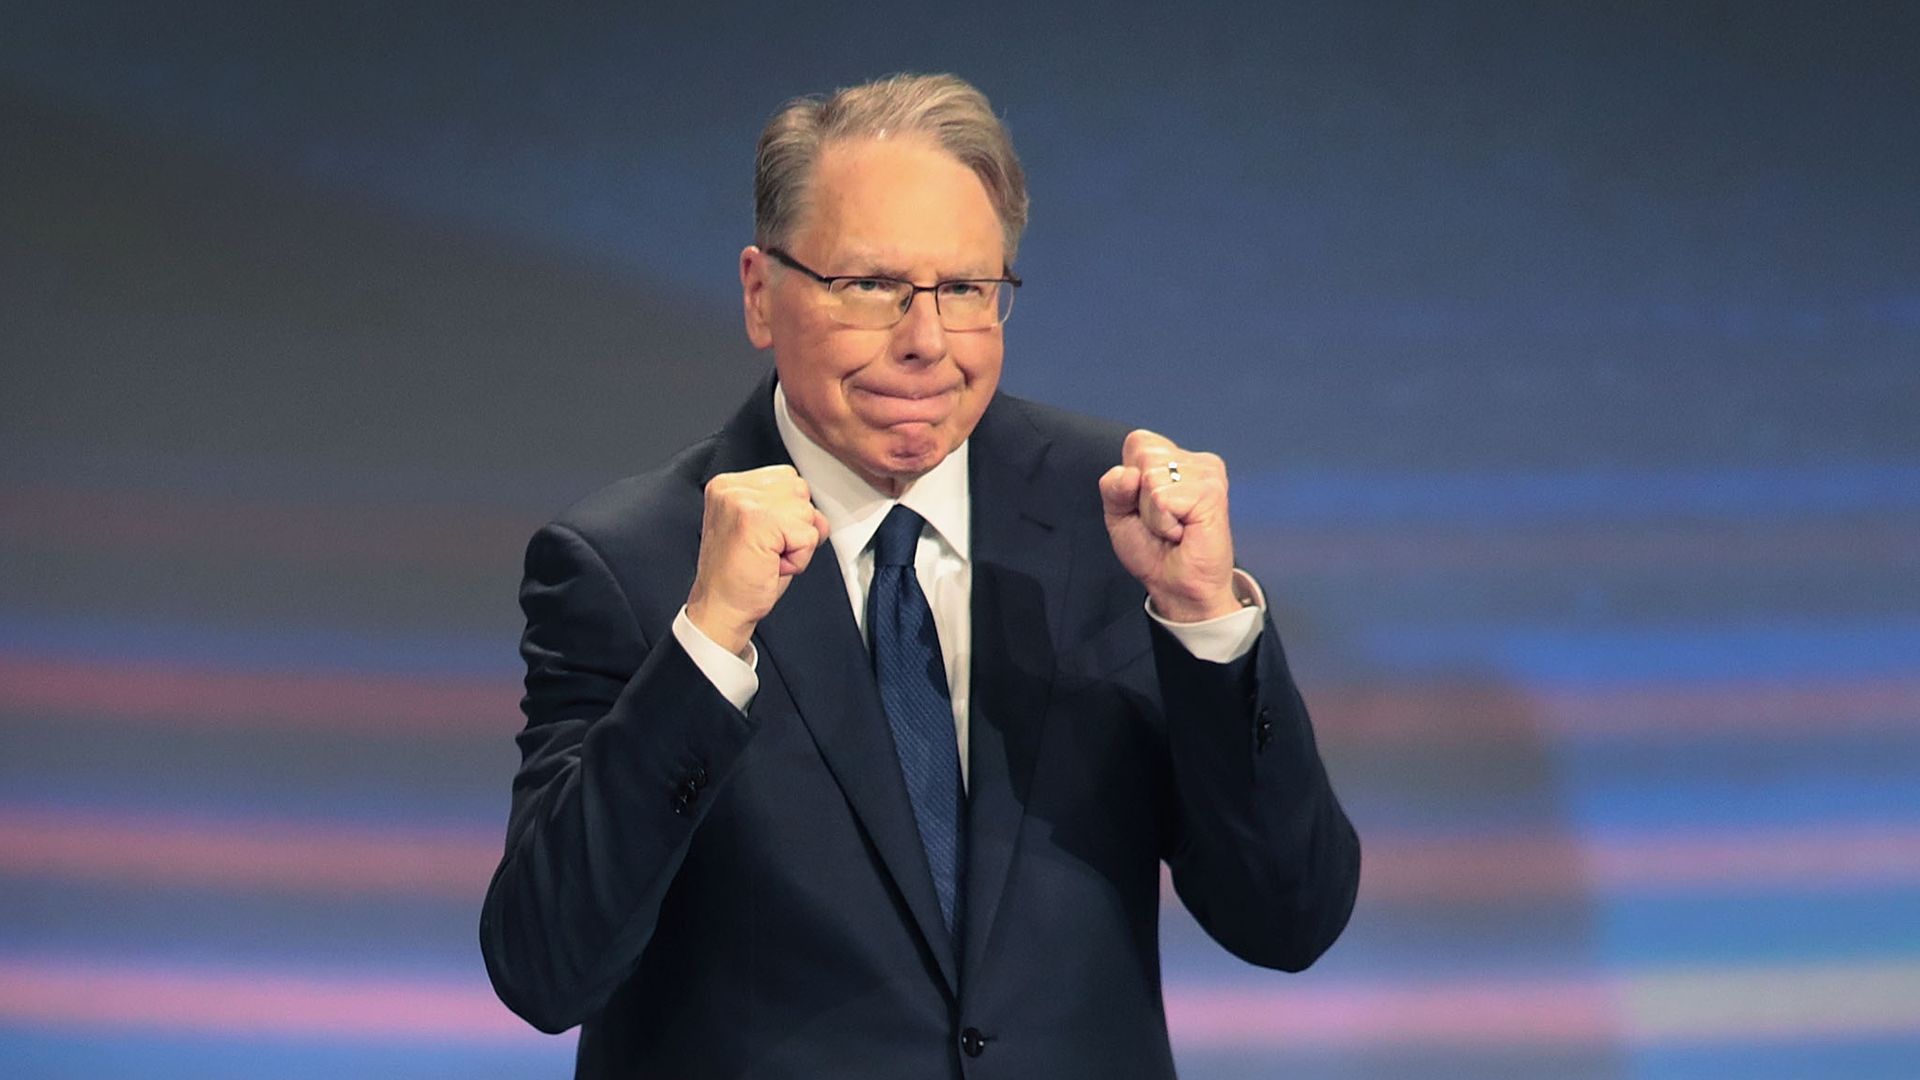 The National Rifle Association re-elected longtime CEO Wayne LaPierre to his leadership position on Monday.